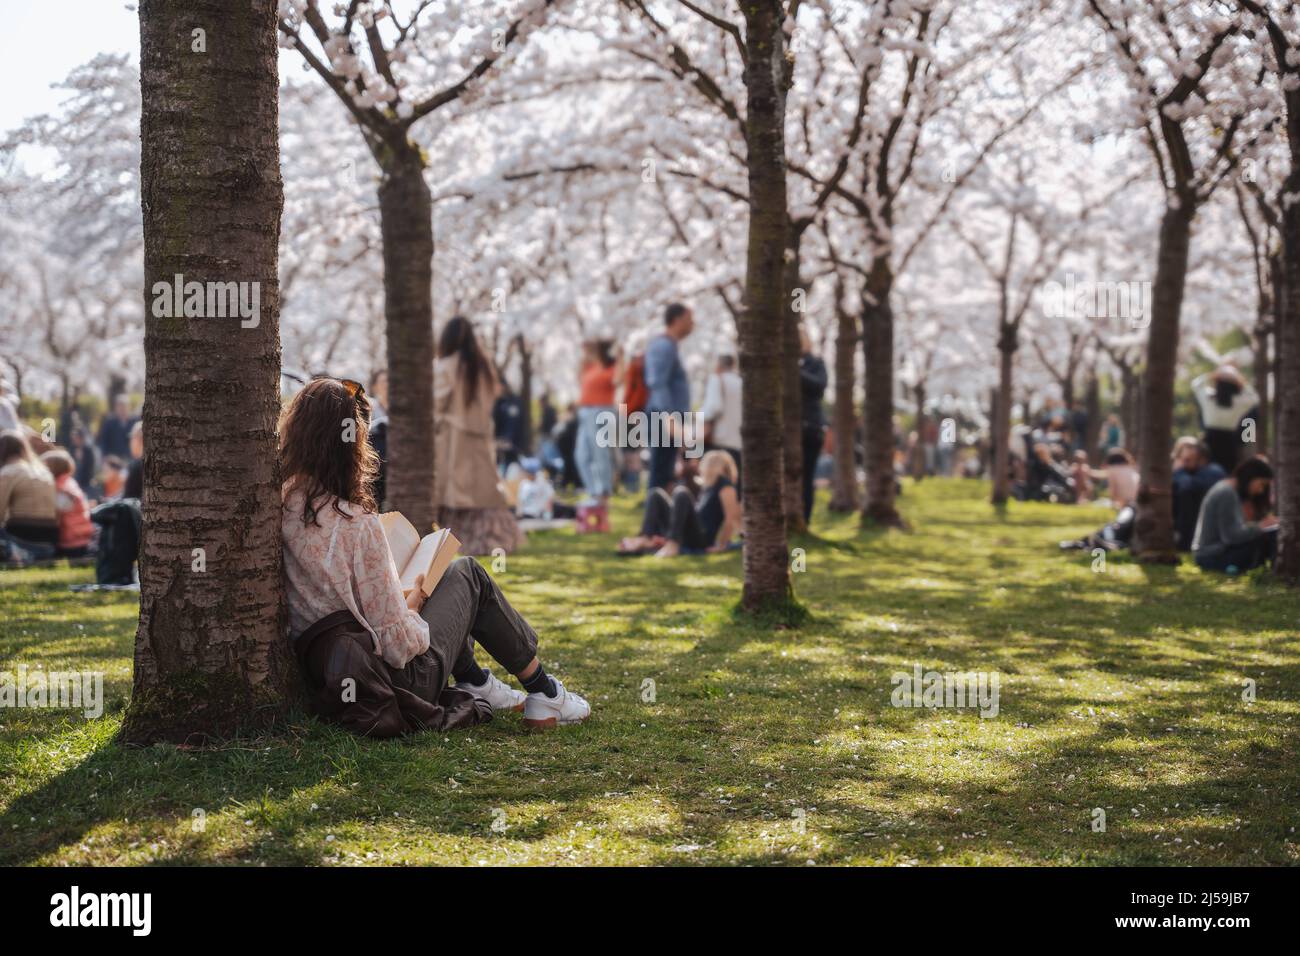 Family, friends, people having a picnic under sakura trees. Pastime with family in the park with cherry blossom trees, enjoy springtime and cherry Stock Photo